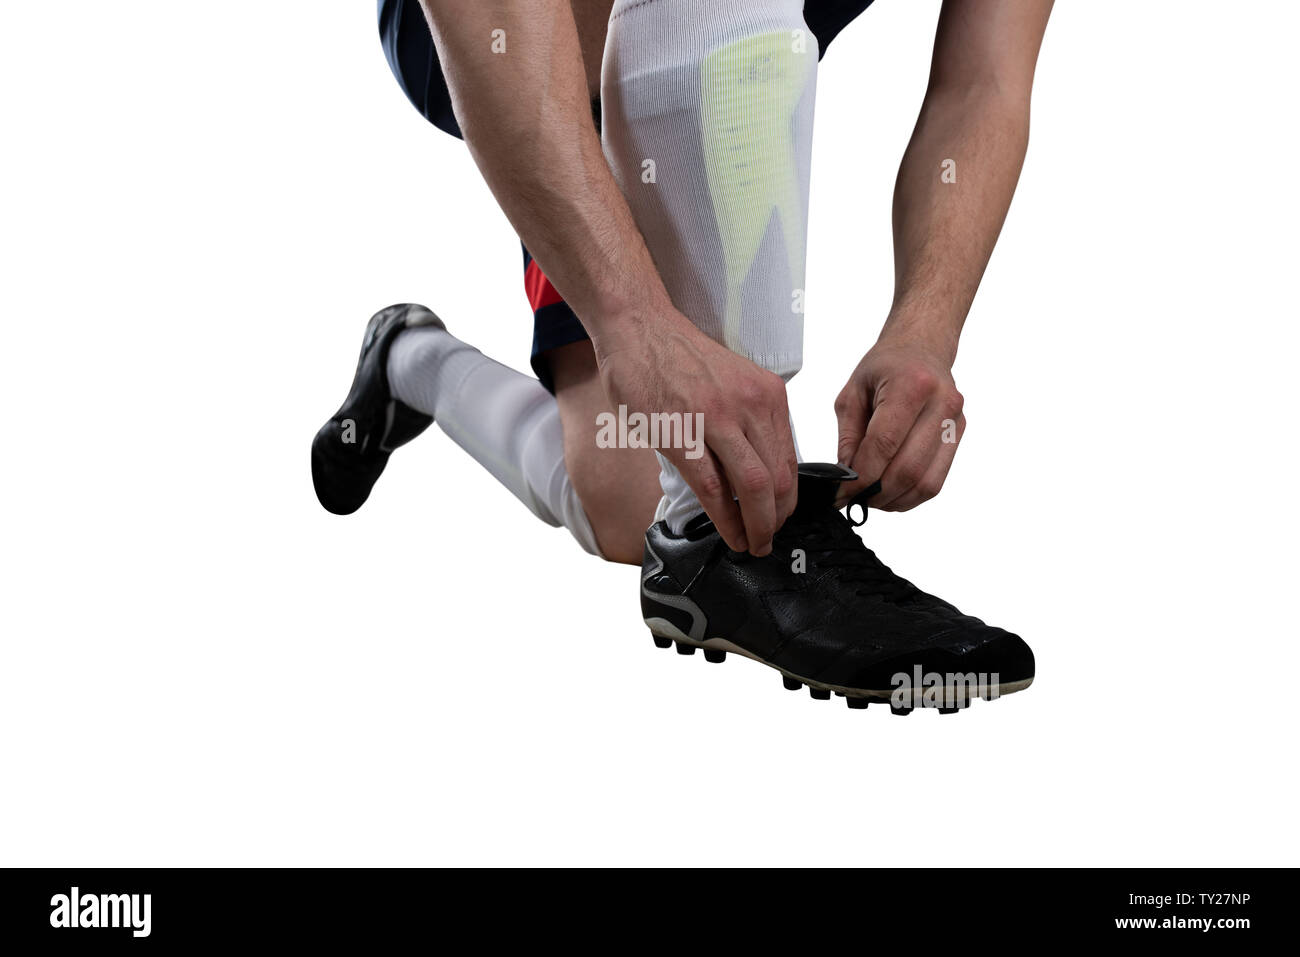 Football player adjust his shoes before the match. Isolated on white background Stock Photo